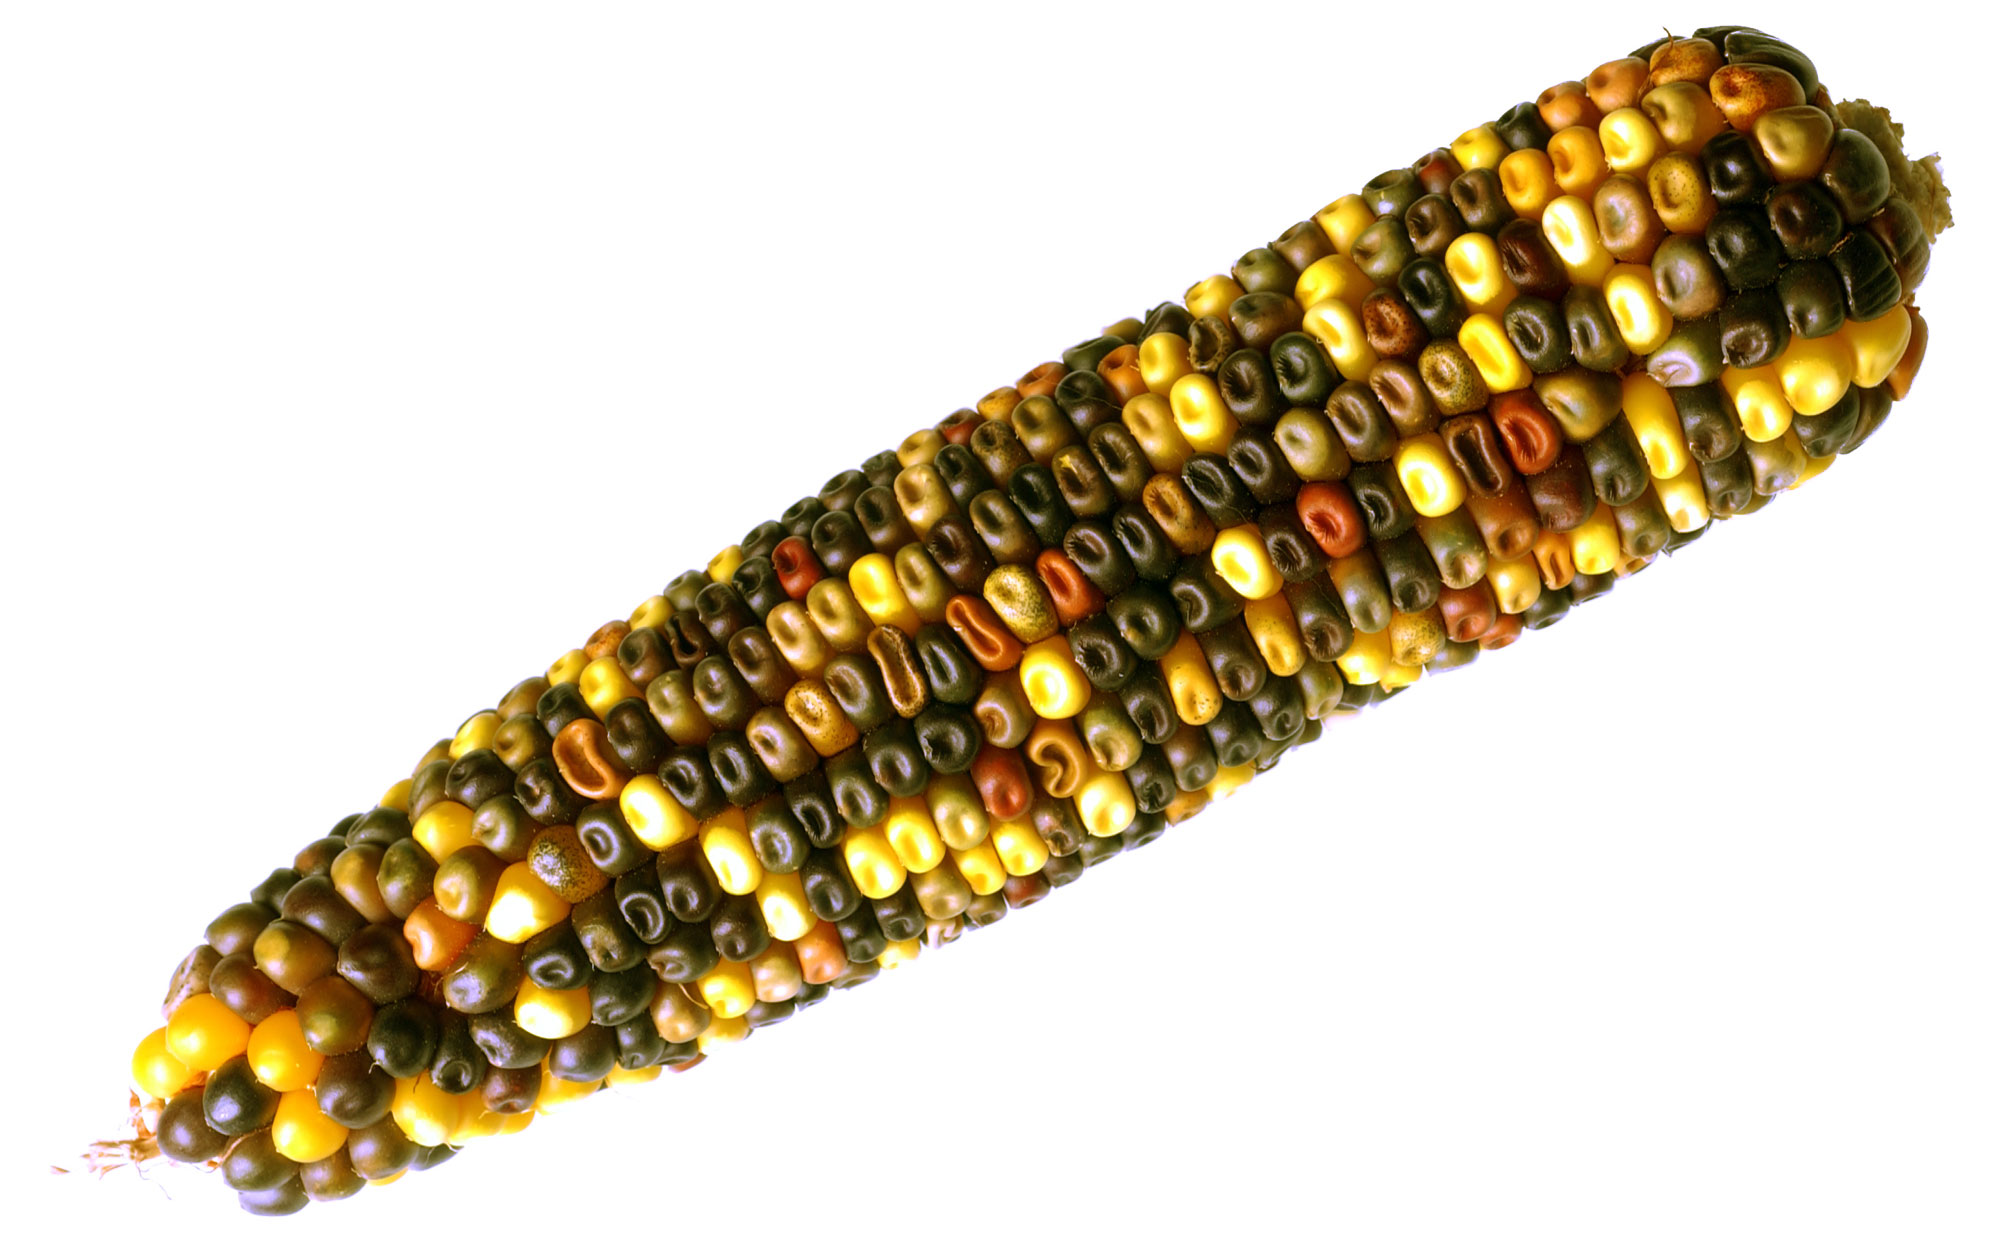 Photograph of an ear of corn with multicolored kernels, ranging from yellow to reddish to blue-black.